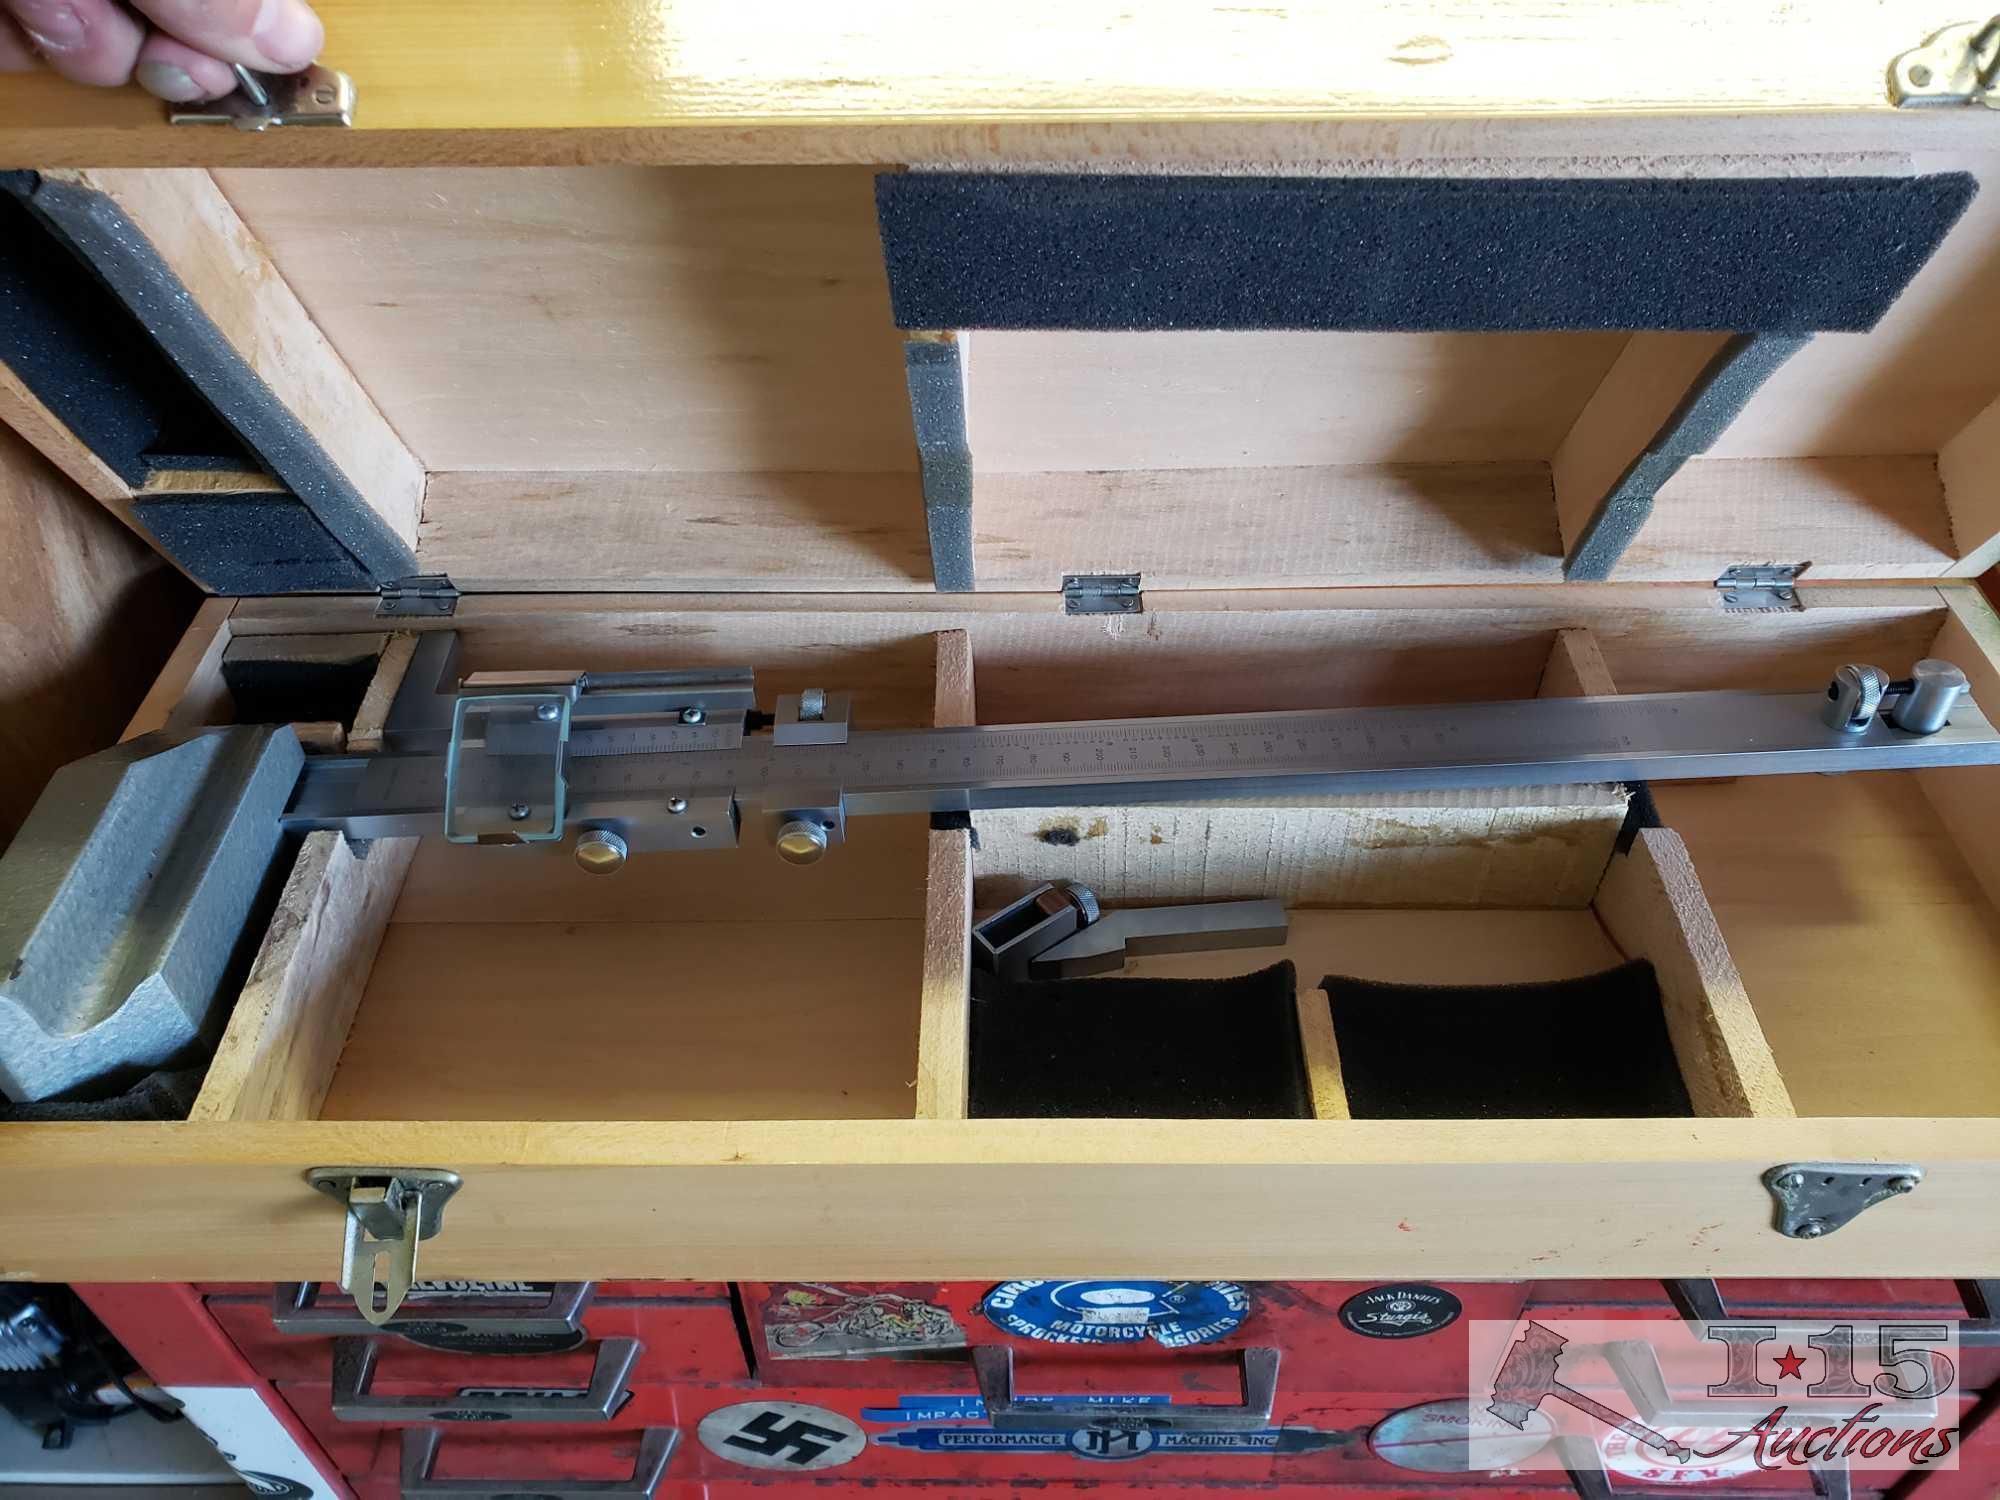 Mac Tools Tool Box with Micrometers/Calipers and Other Tools